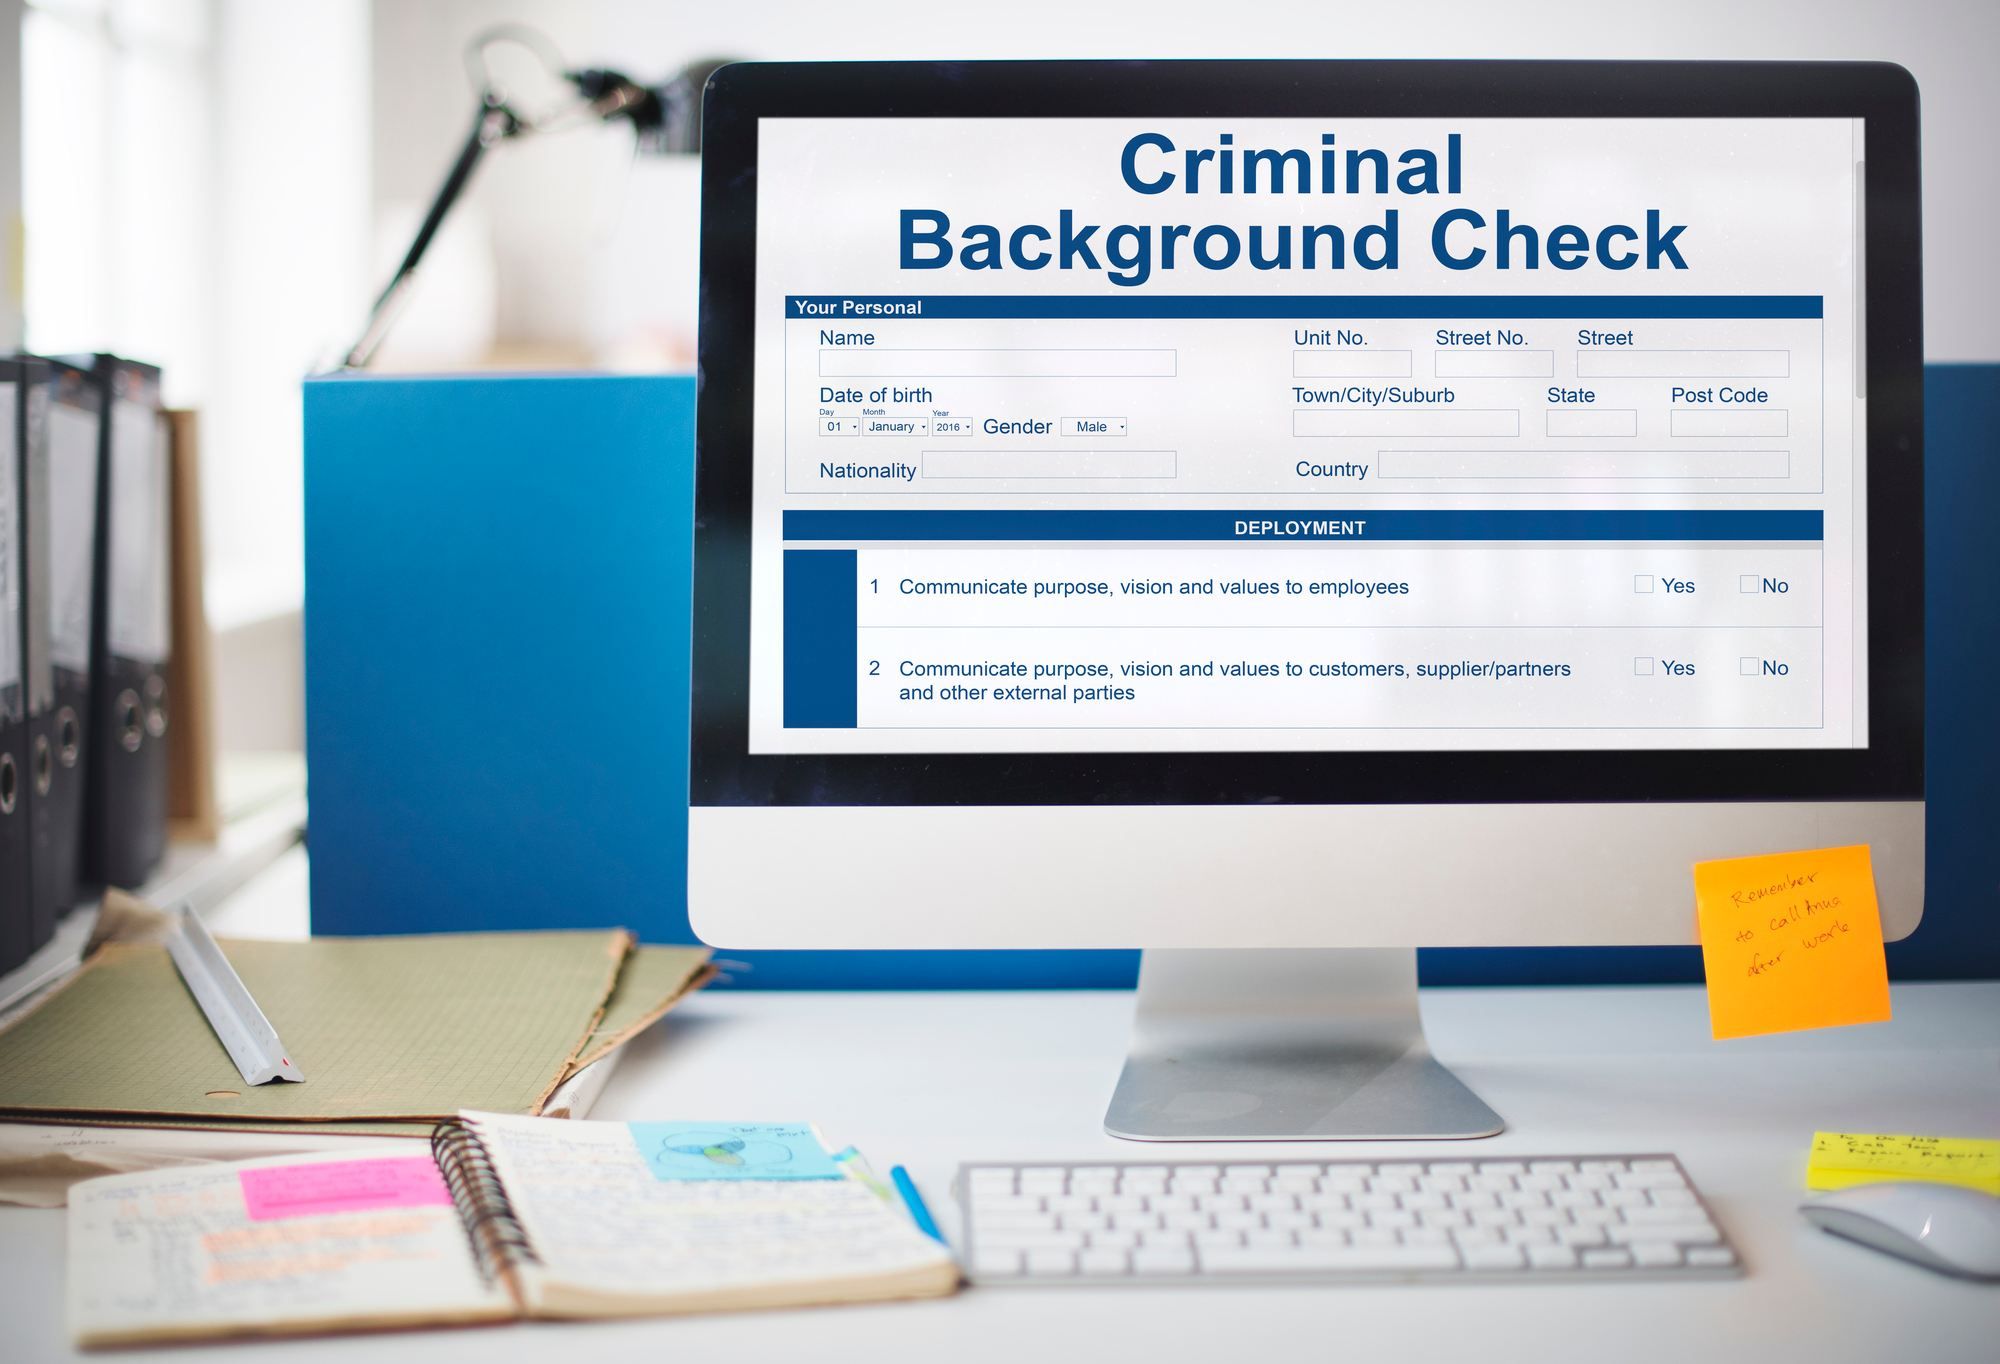 Mylife must face a class action lawsuit over its alleged false criminal background checks 